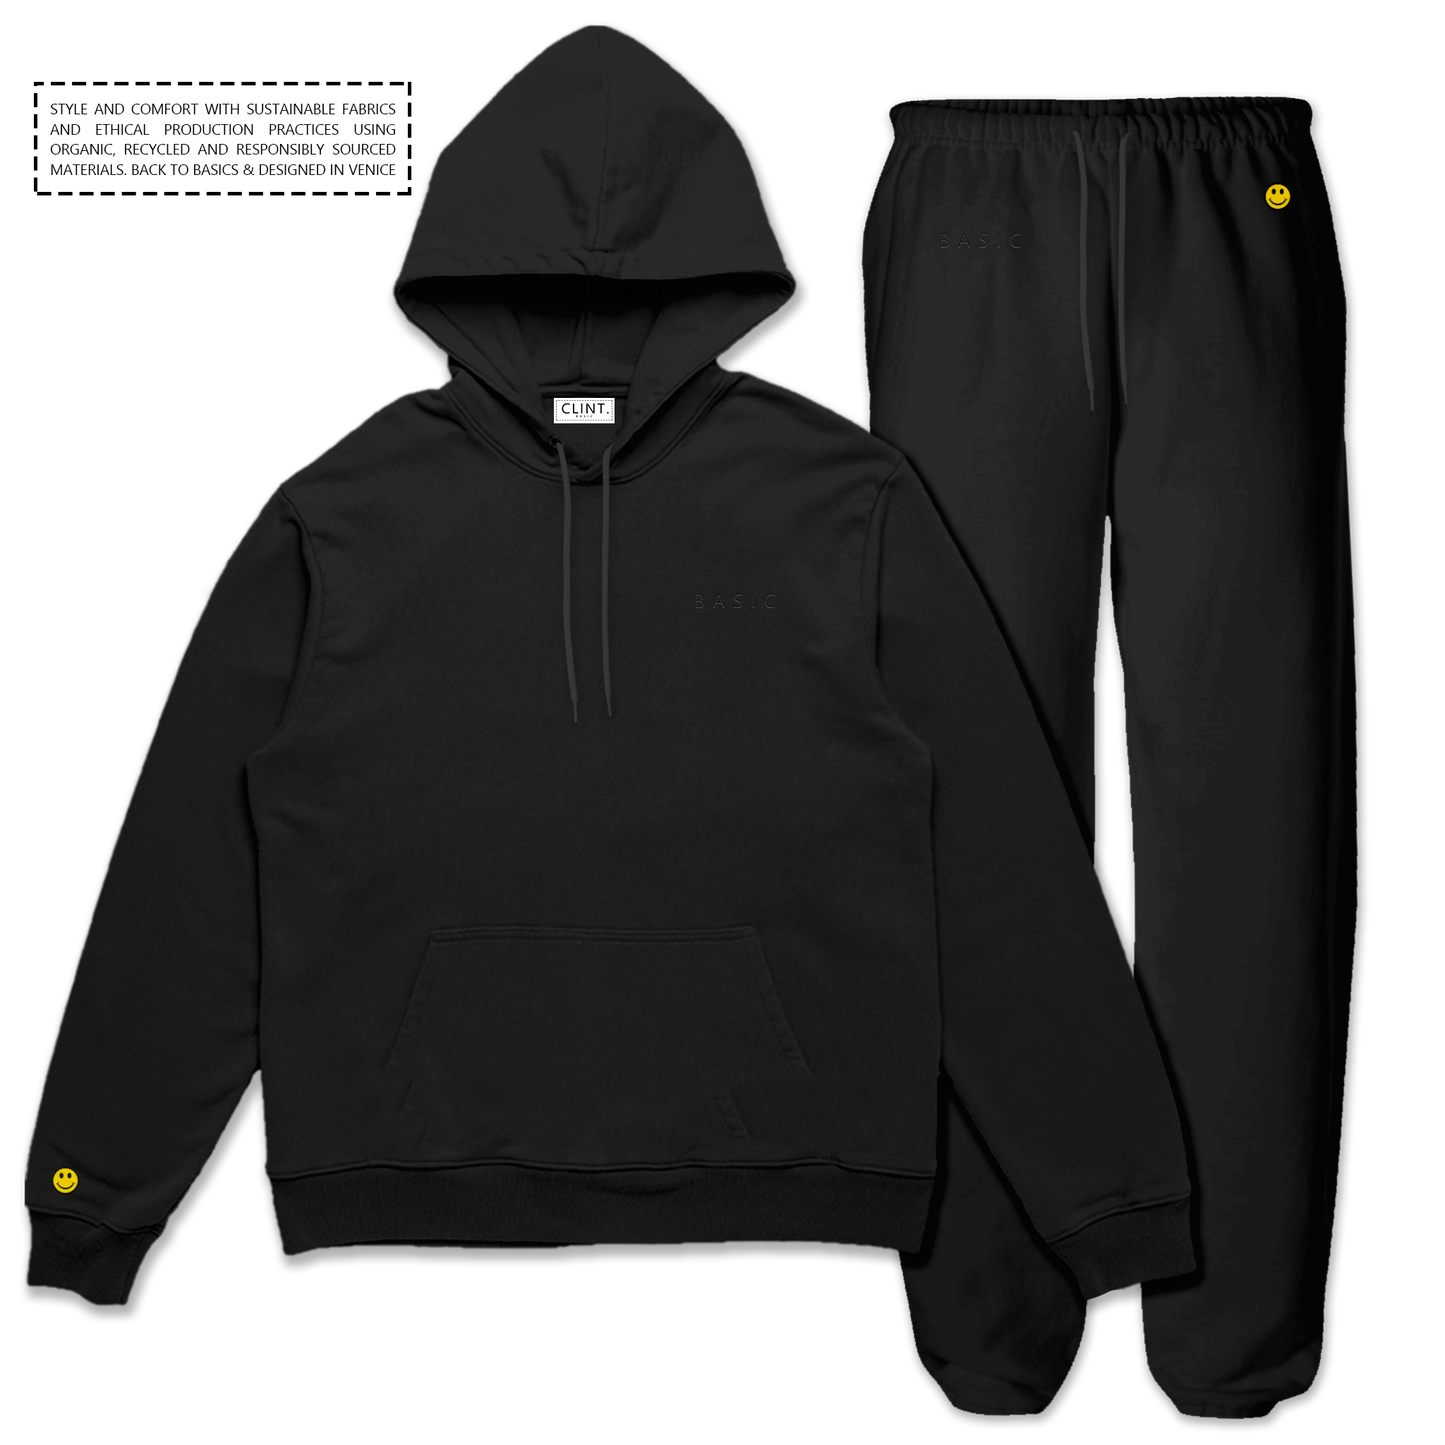 Another Basic Hoodie Sweatsuit